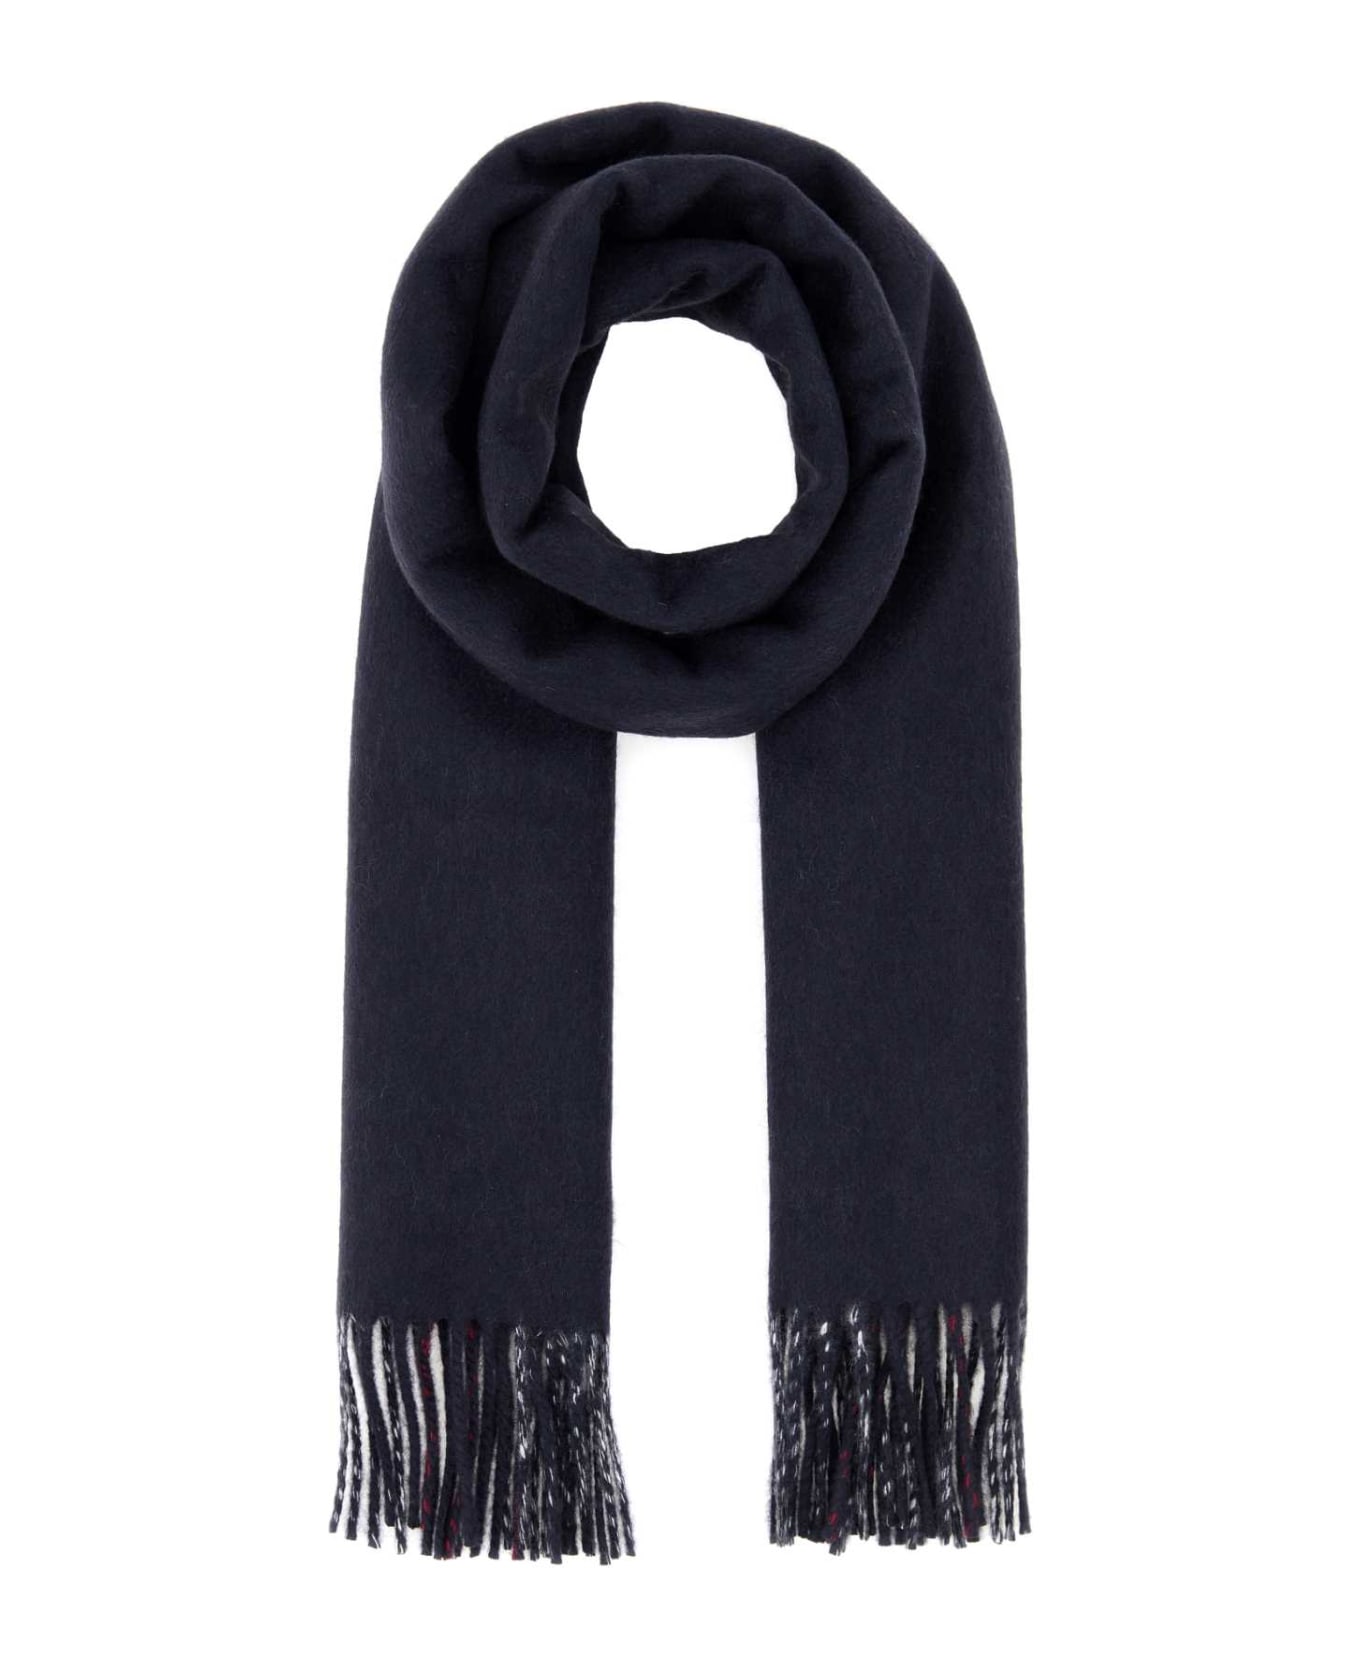 Burberry Navy Blue Cashmere Reversible Scarf - NAVY スカーフ